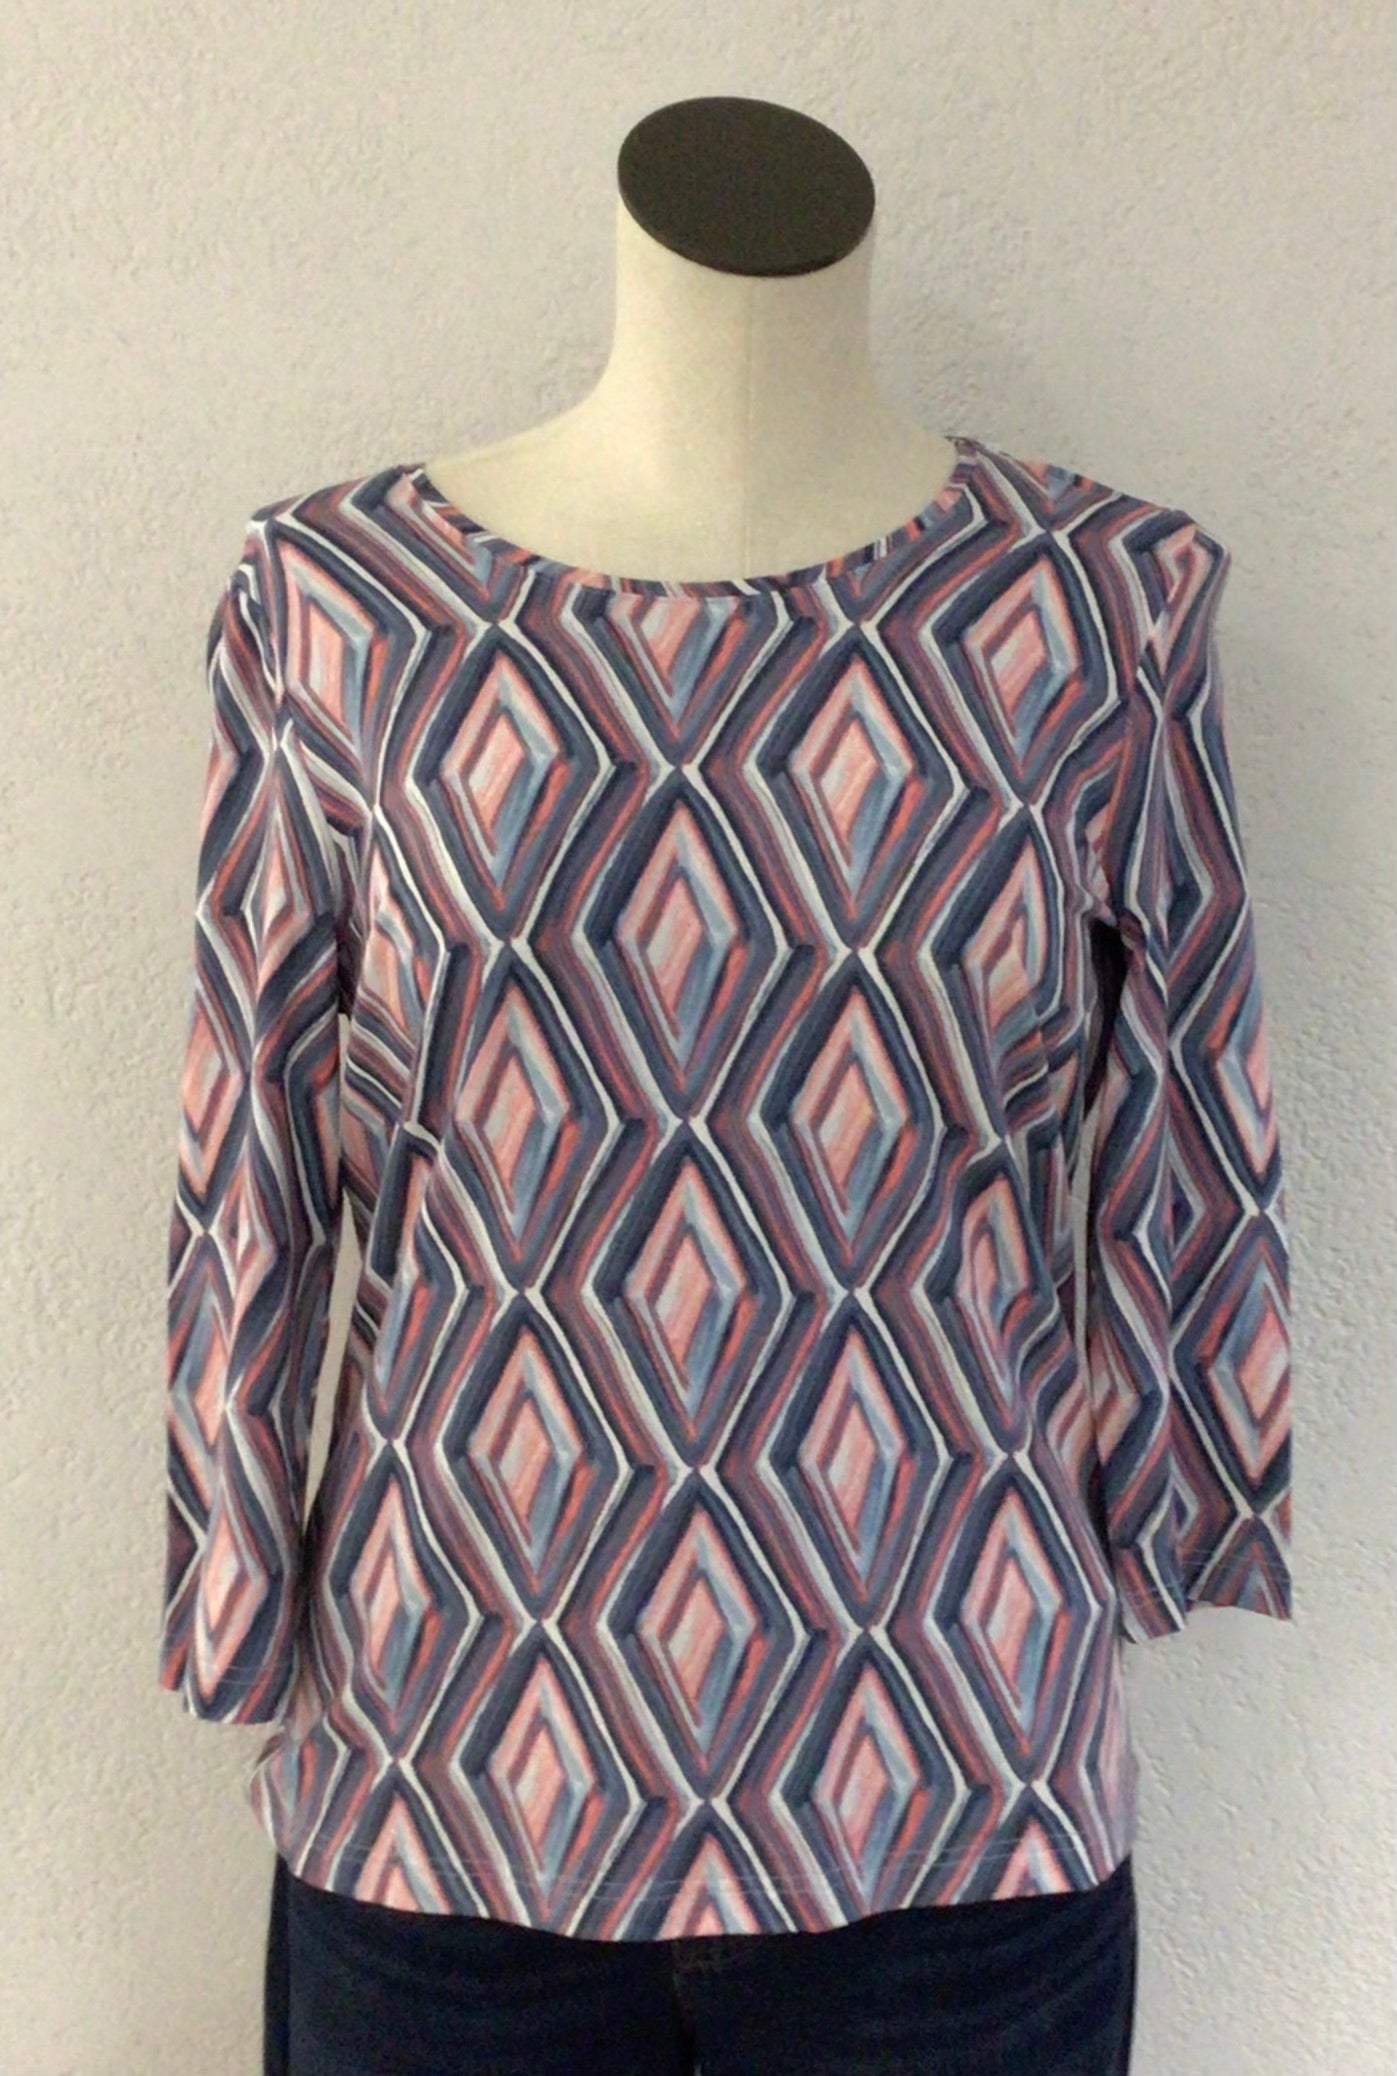 Sunday Pink and Blue Print Top 6103-770